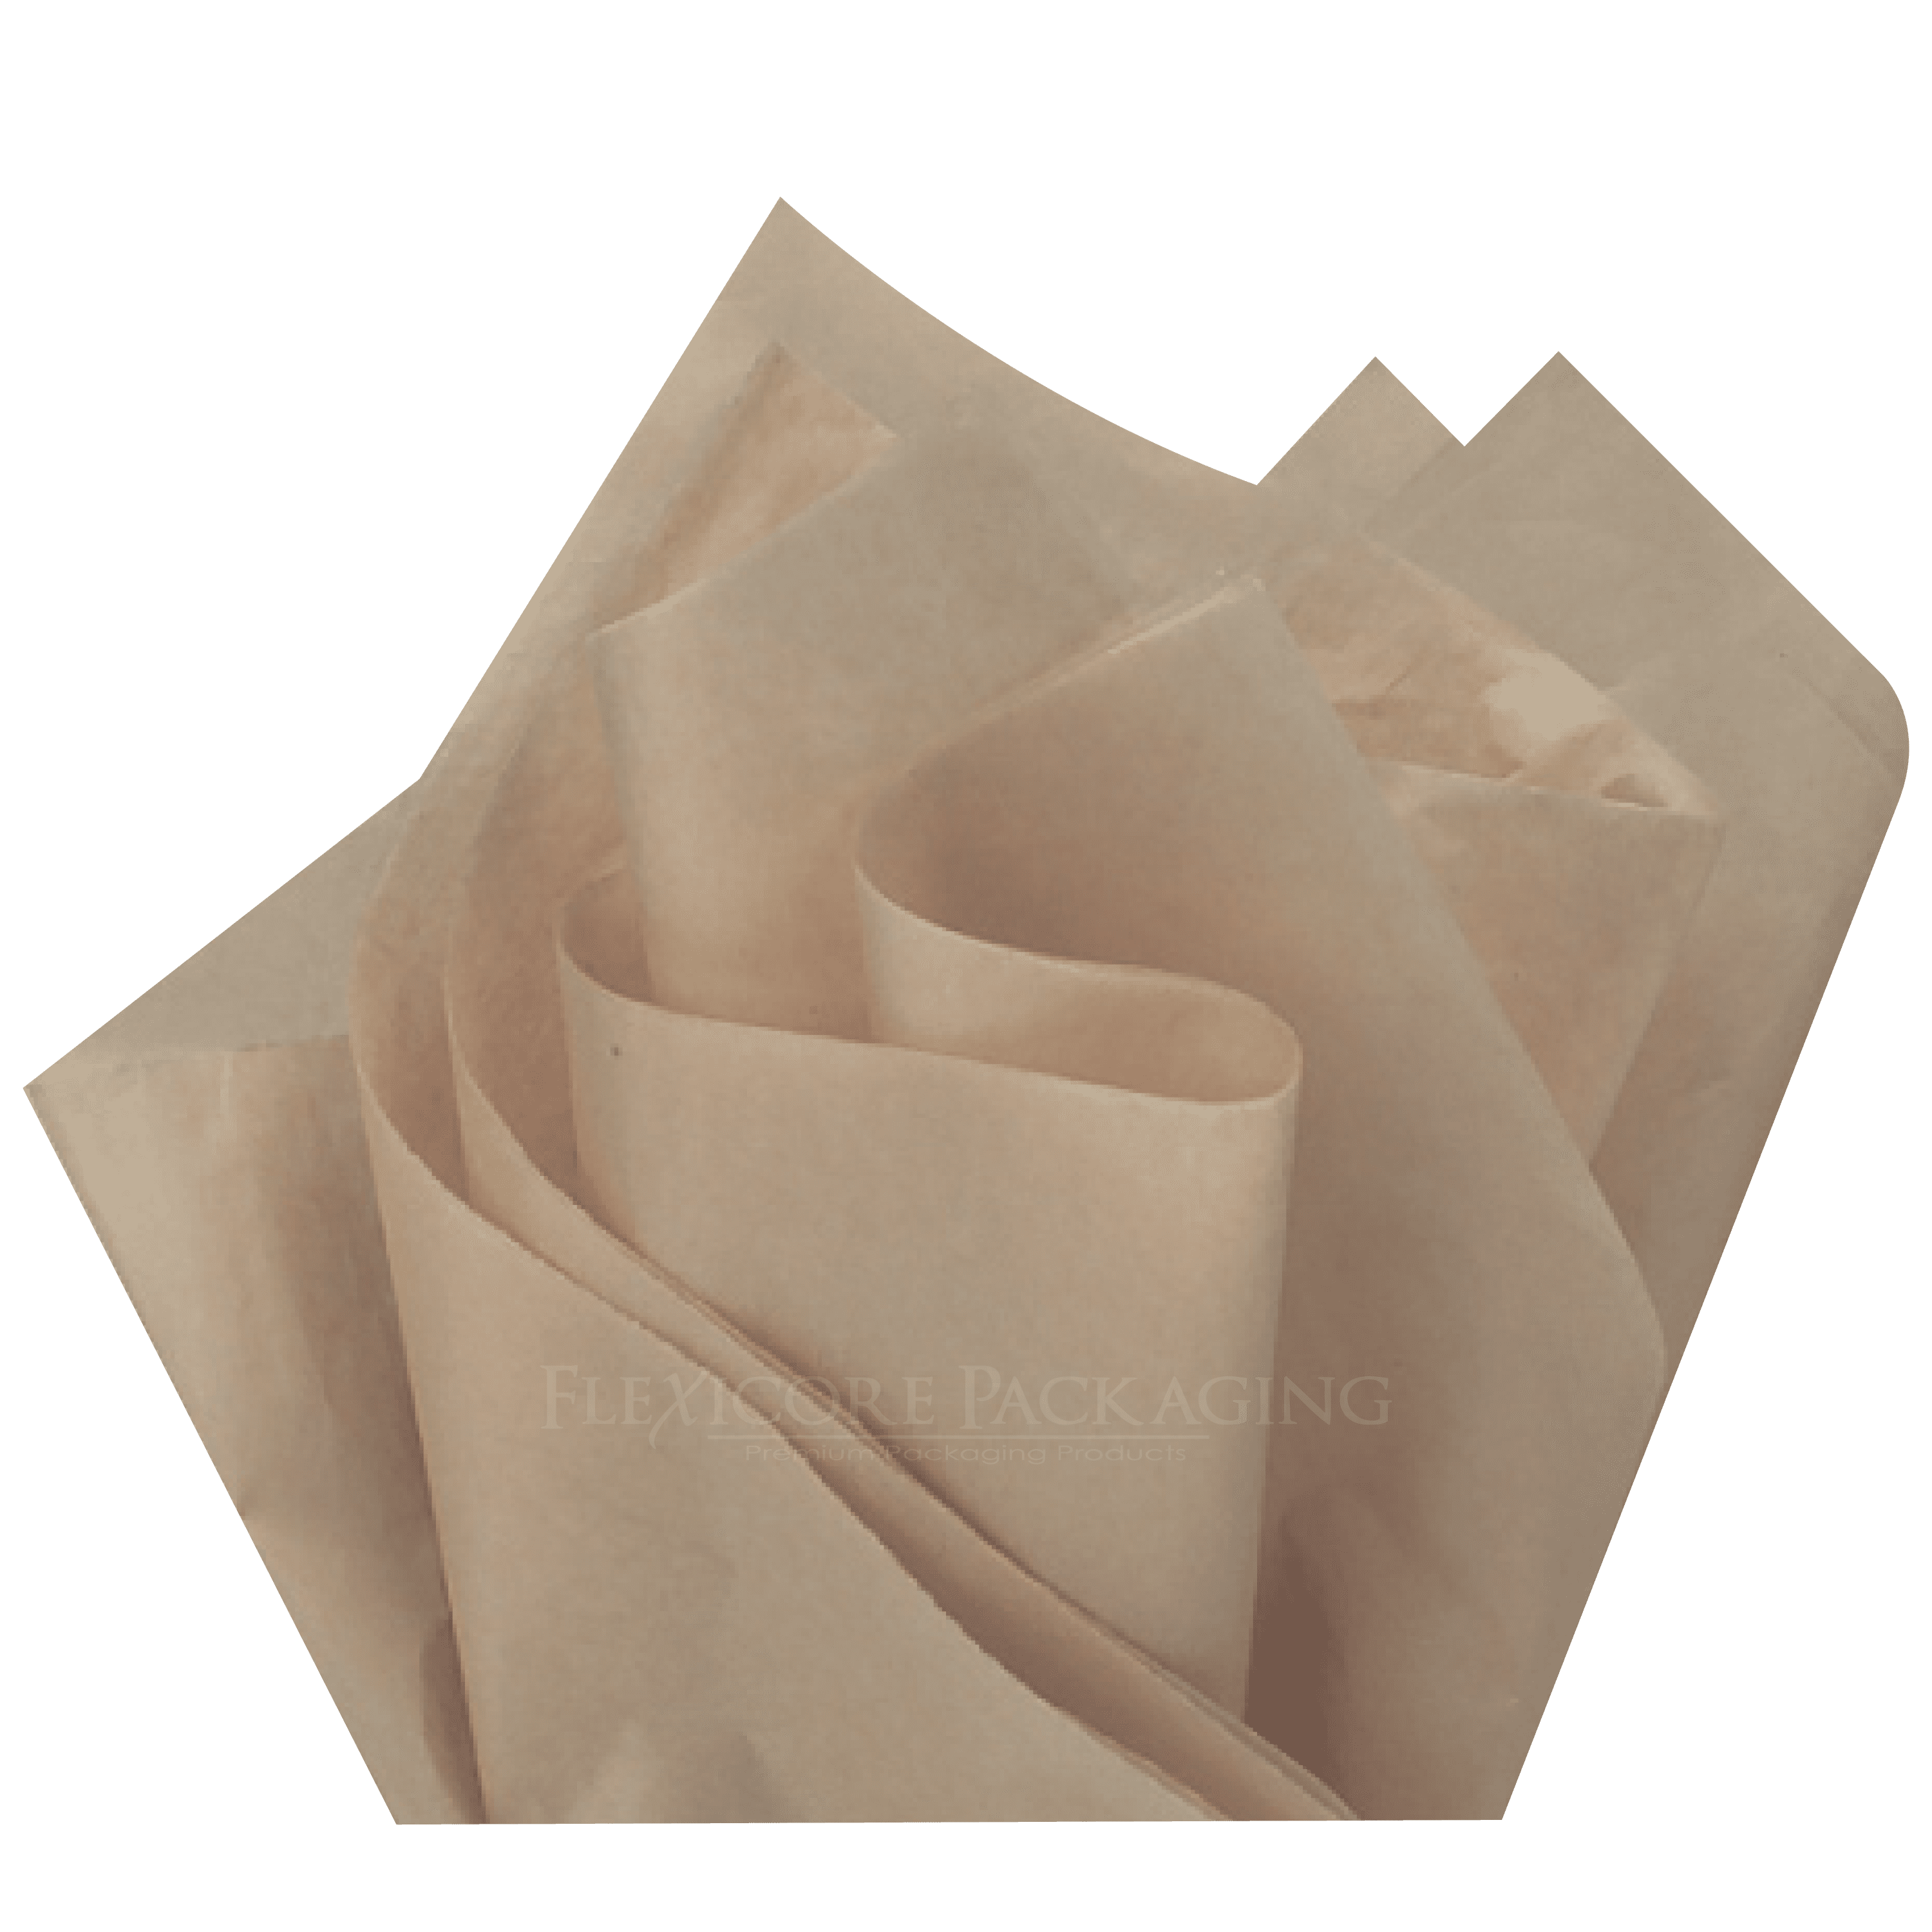 24 Sheets Pack 20" x 30" Kraft Brown Quality Premium Grade Color Tissue Paper 